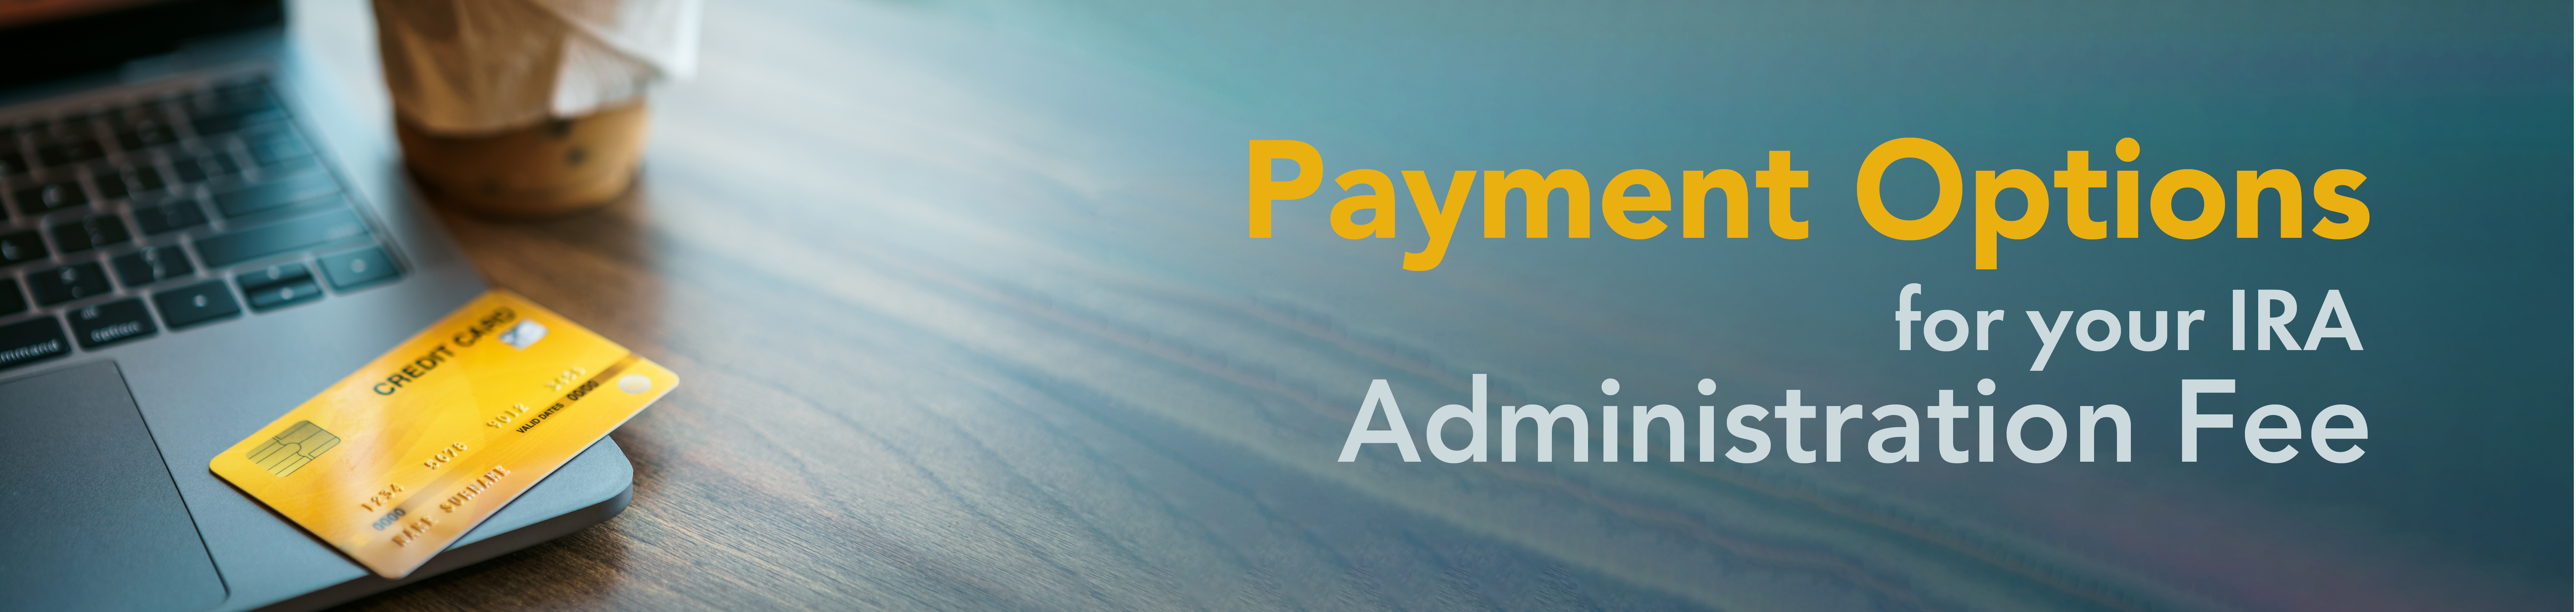 Payment Options for IRA Administration Fee